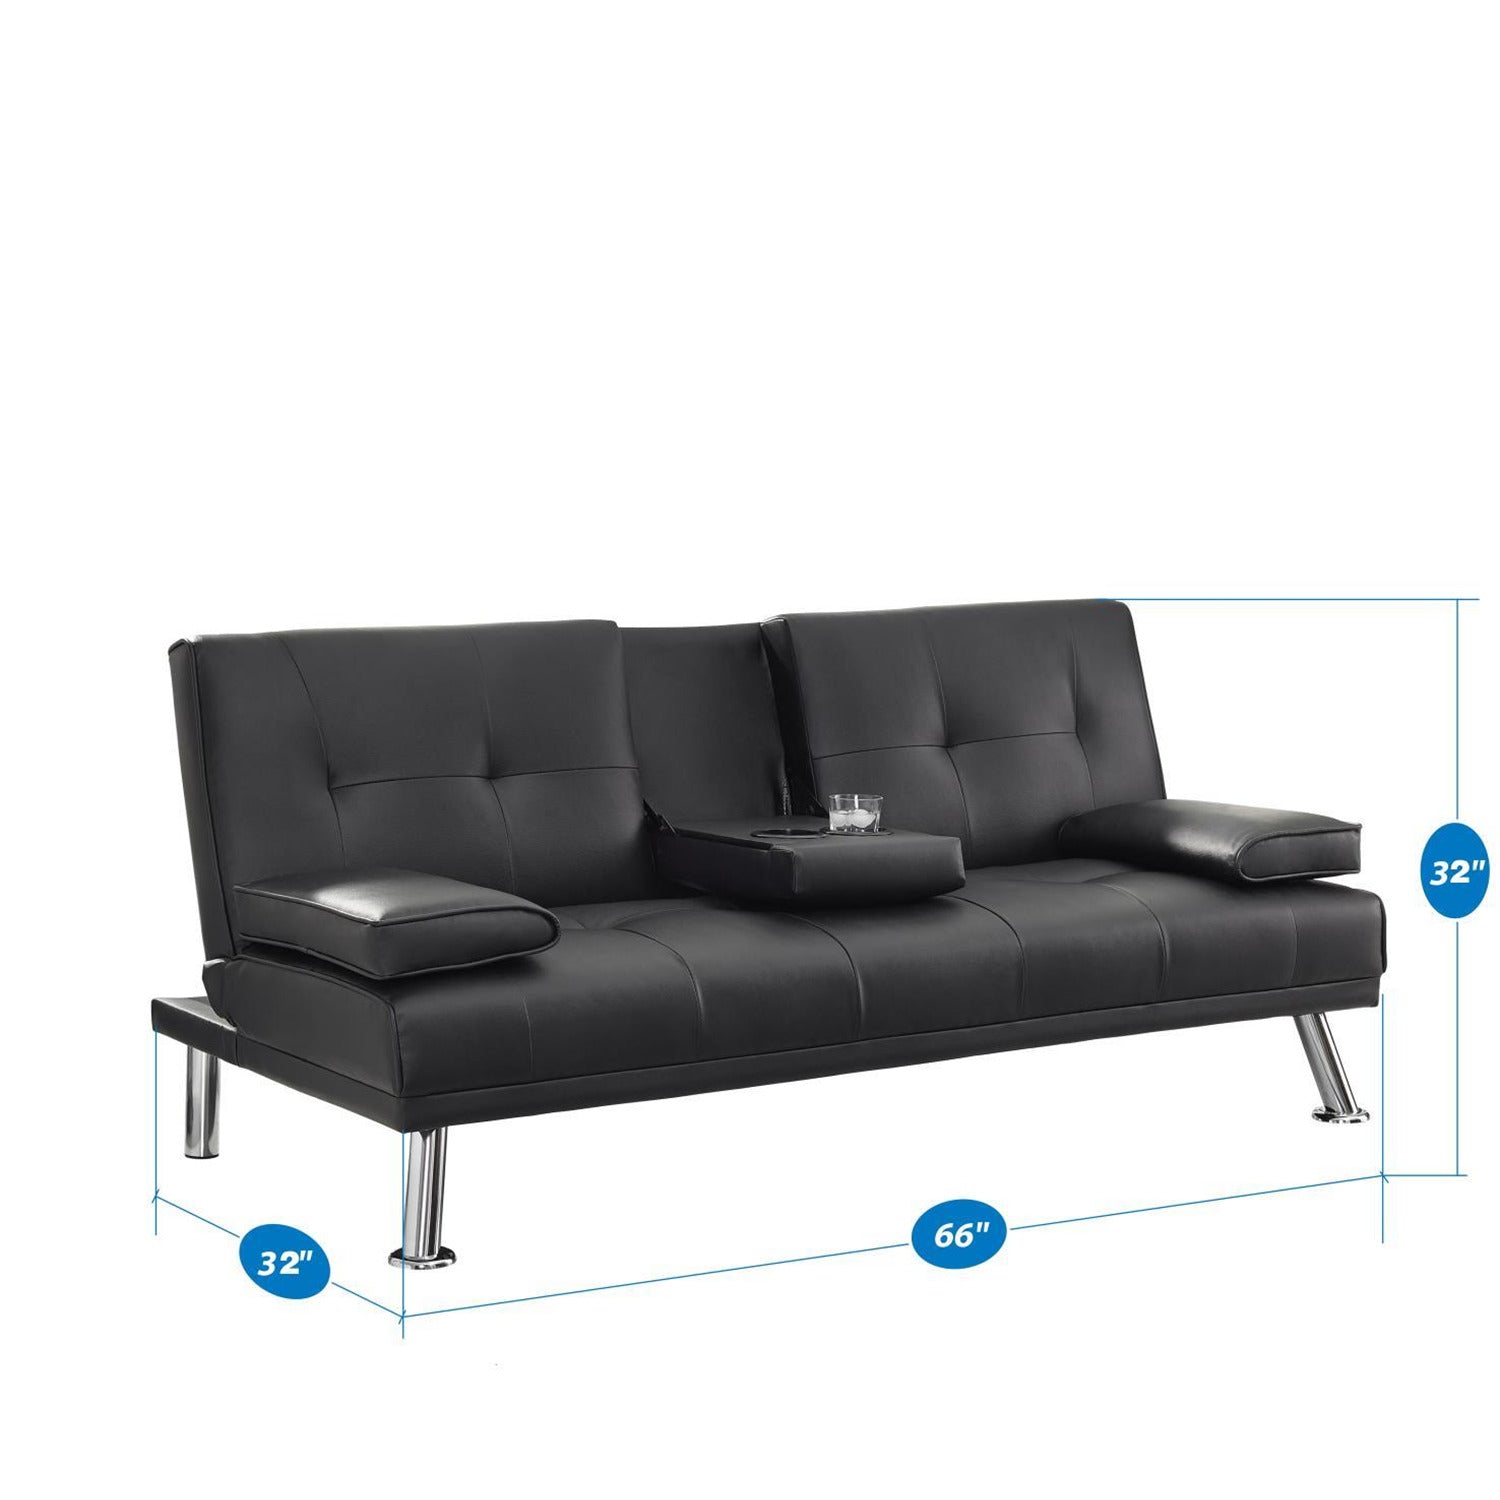 Sofa Cum Beds: Reversible Daybed Guest Bed, 3 Angles Adjust , Black